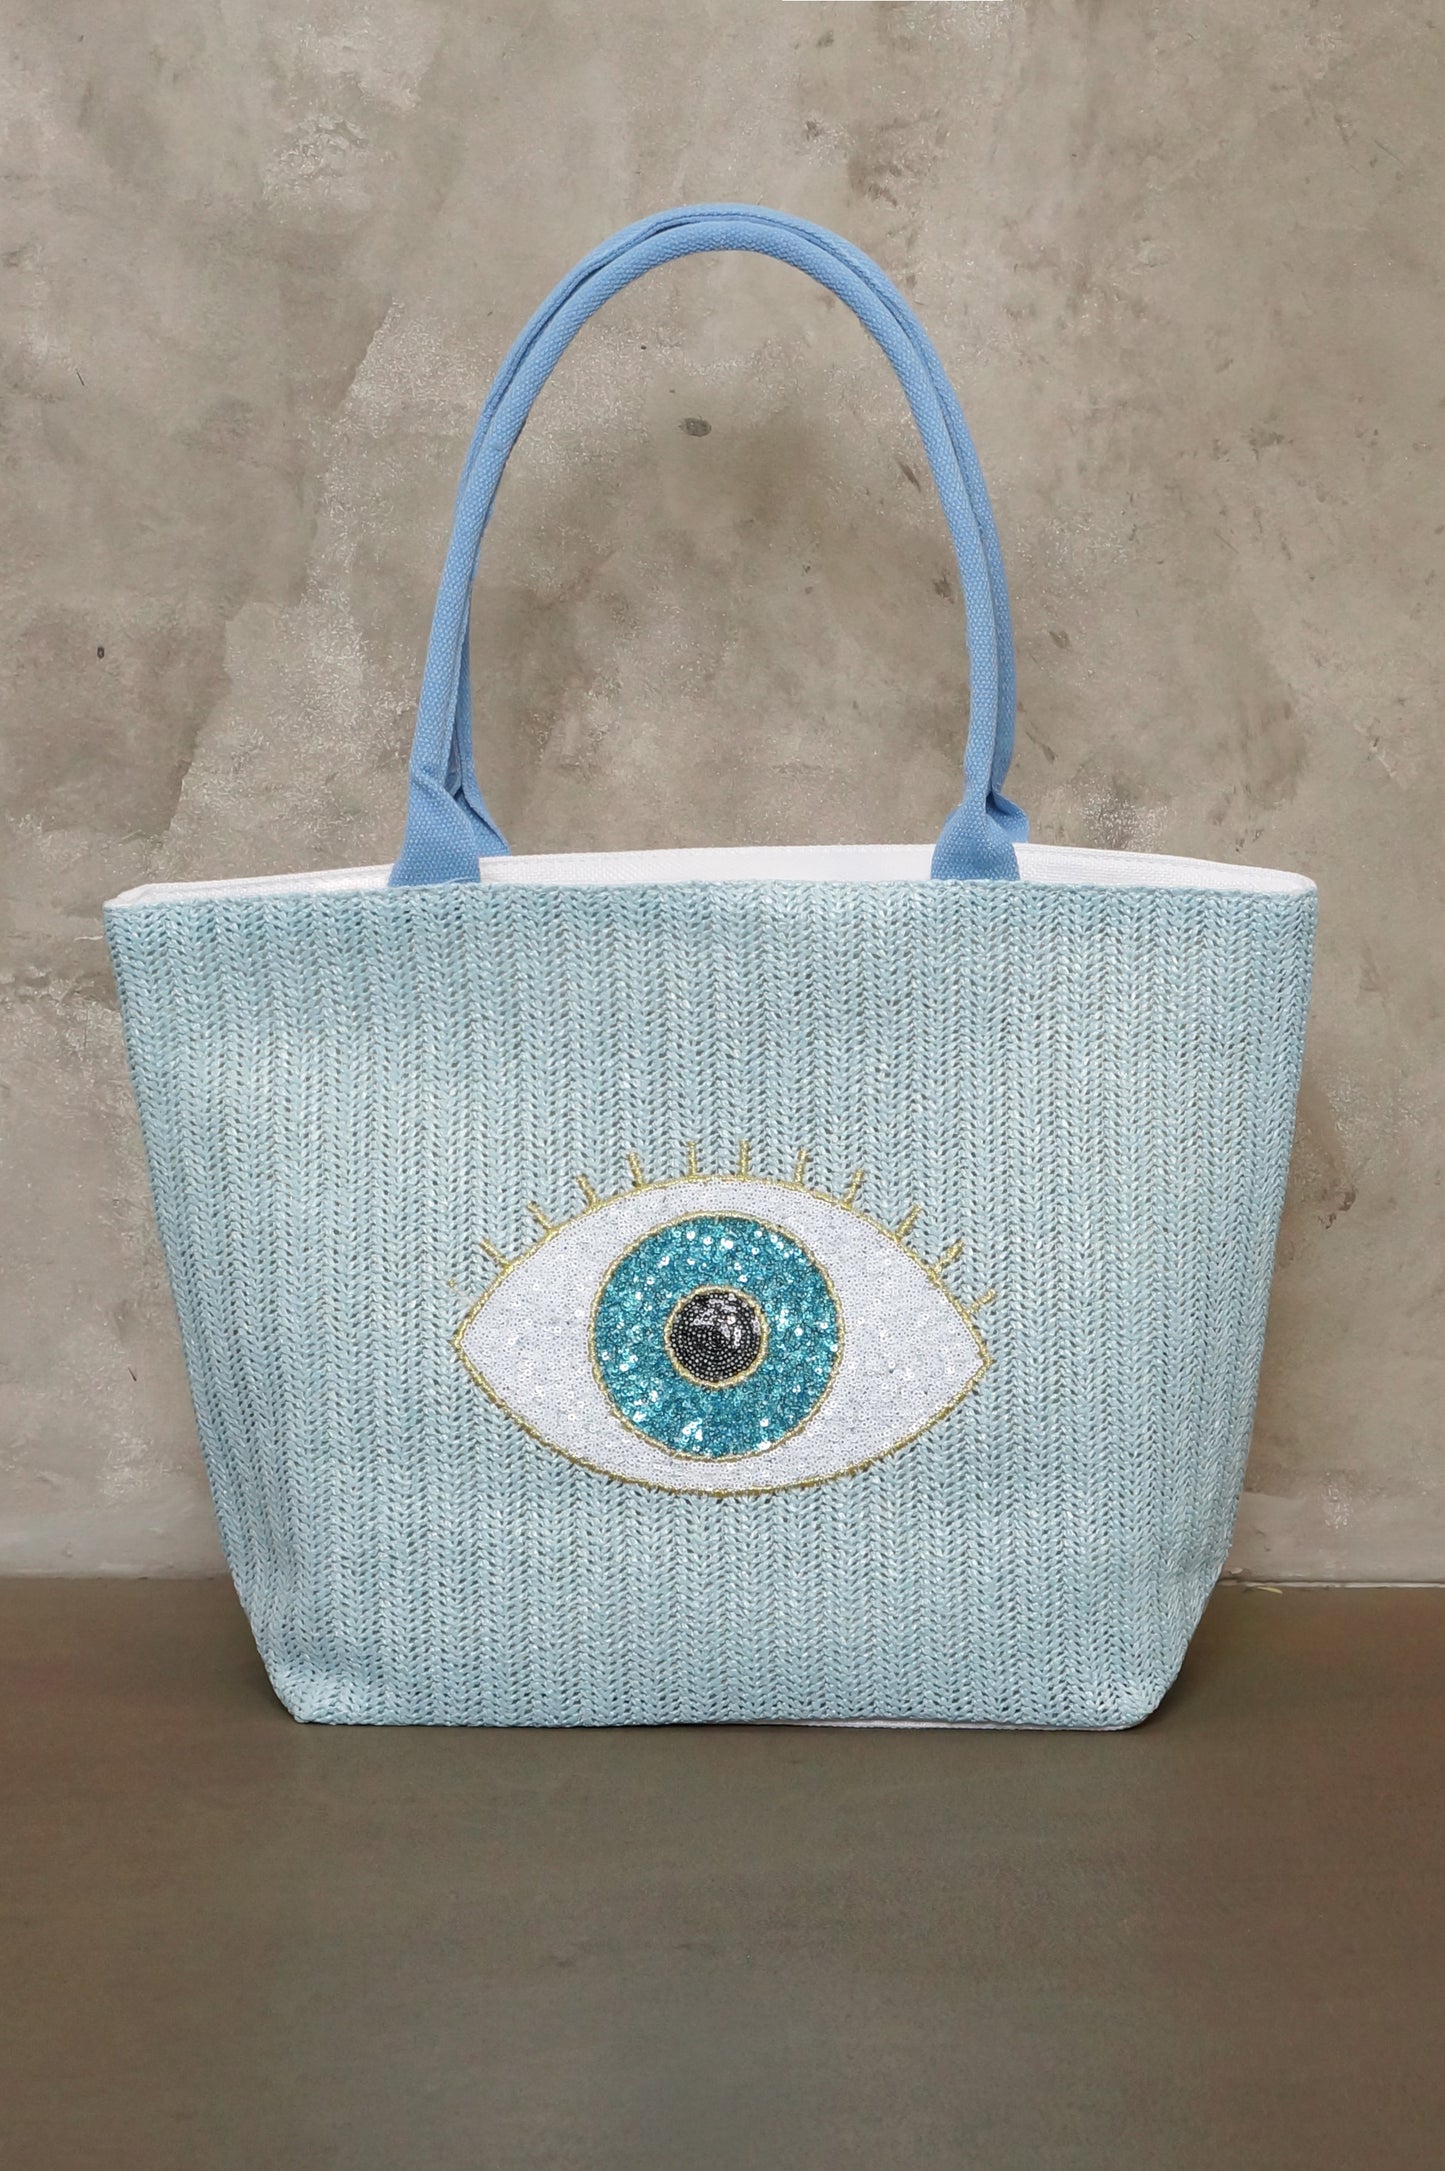 Like No Other Purse - Pink & Blue